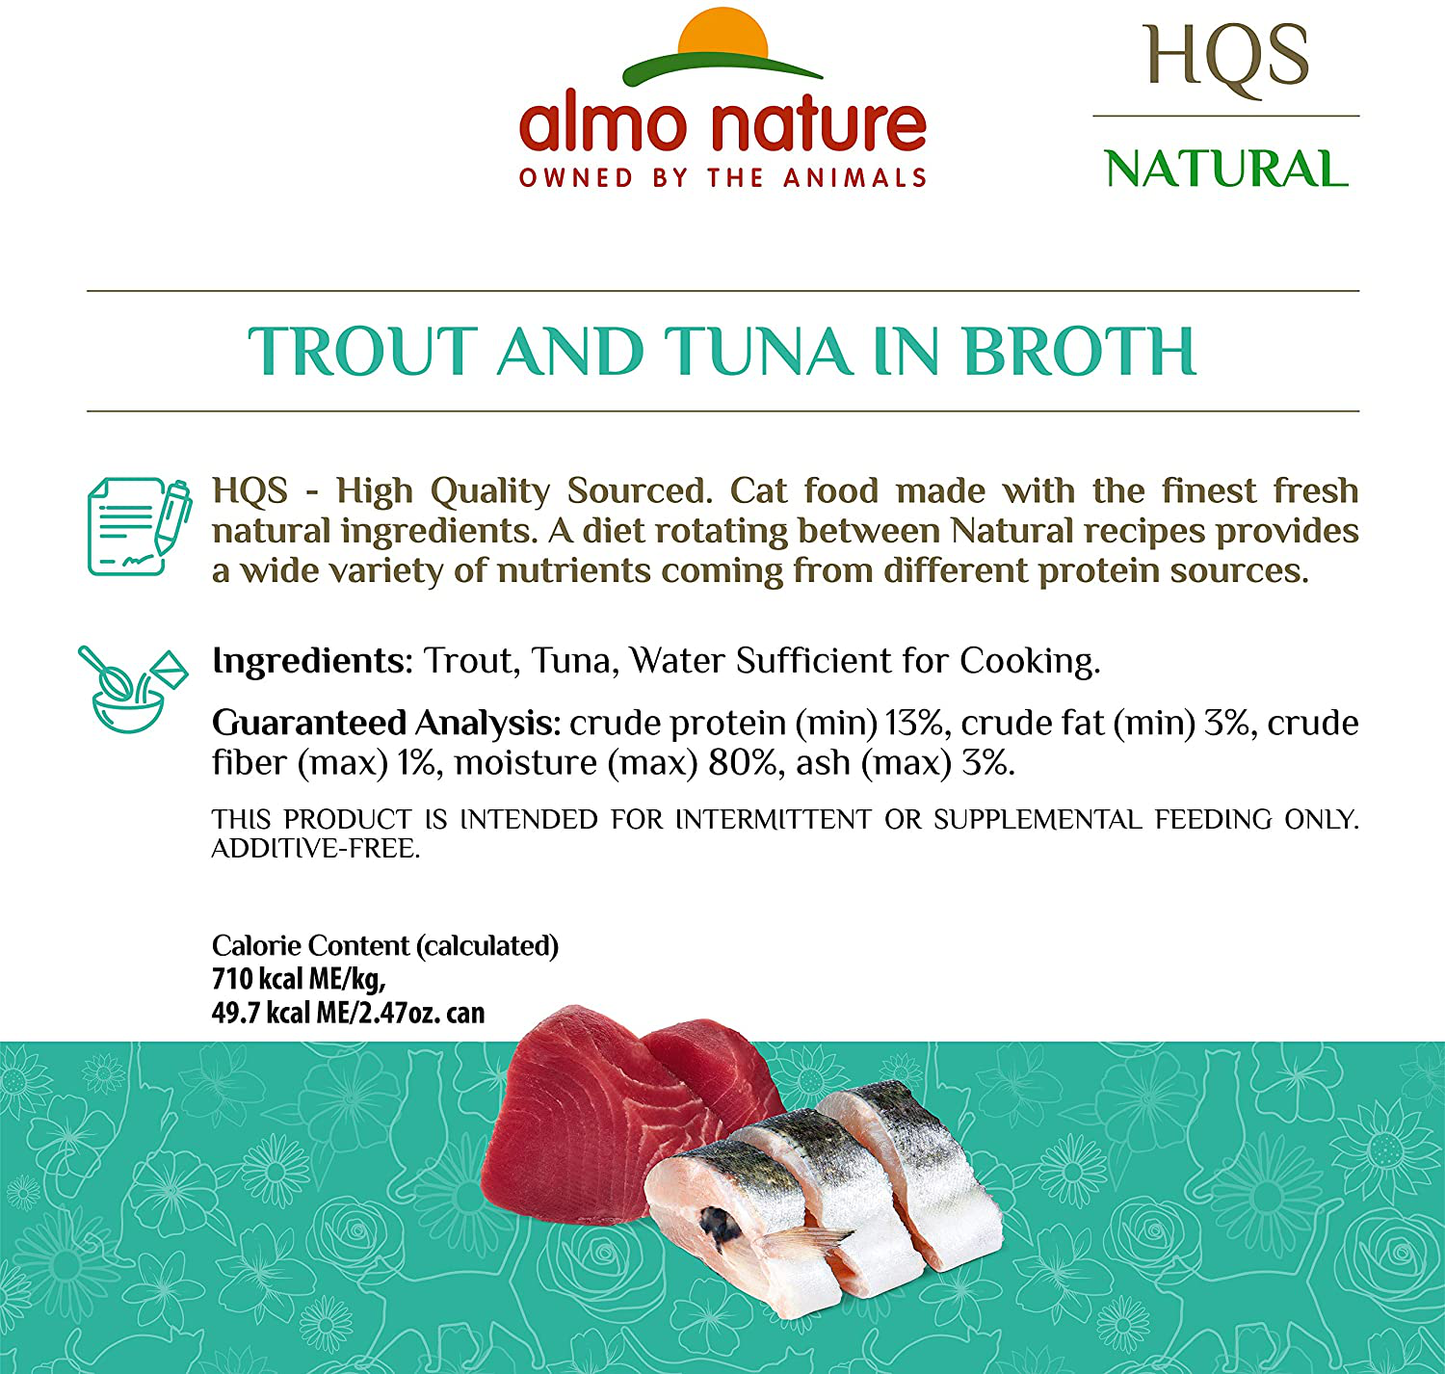 Almo Nature HQS Natural Variety Pack Grain Free, Additive Free Recipes - Atlantic Style Tuna(6); Mackerel (6); Chicken & Shrimps(6); Trout & Tuna (6) Adult Cat Canned Wet Food, Shredded Animals & Pet Supplies > Pet Supplies > Small Animal Supplies > Small Animal Food Almo Nature USA   